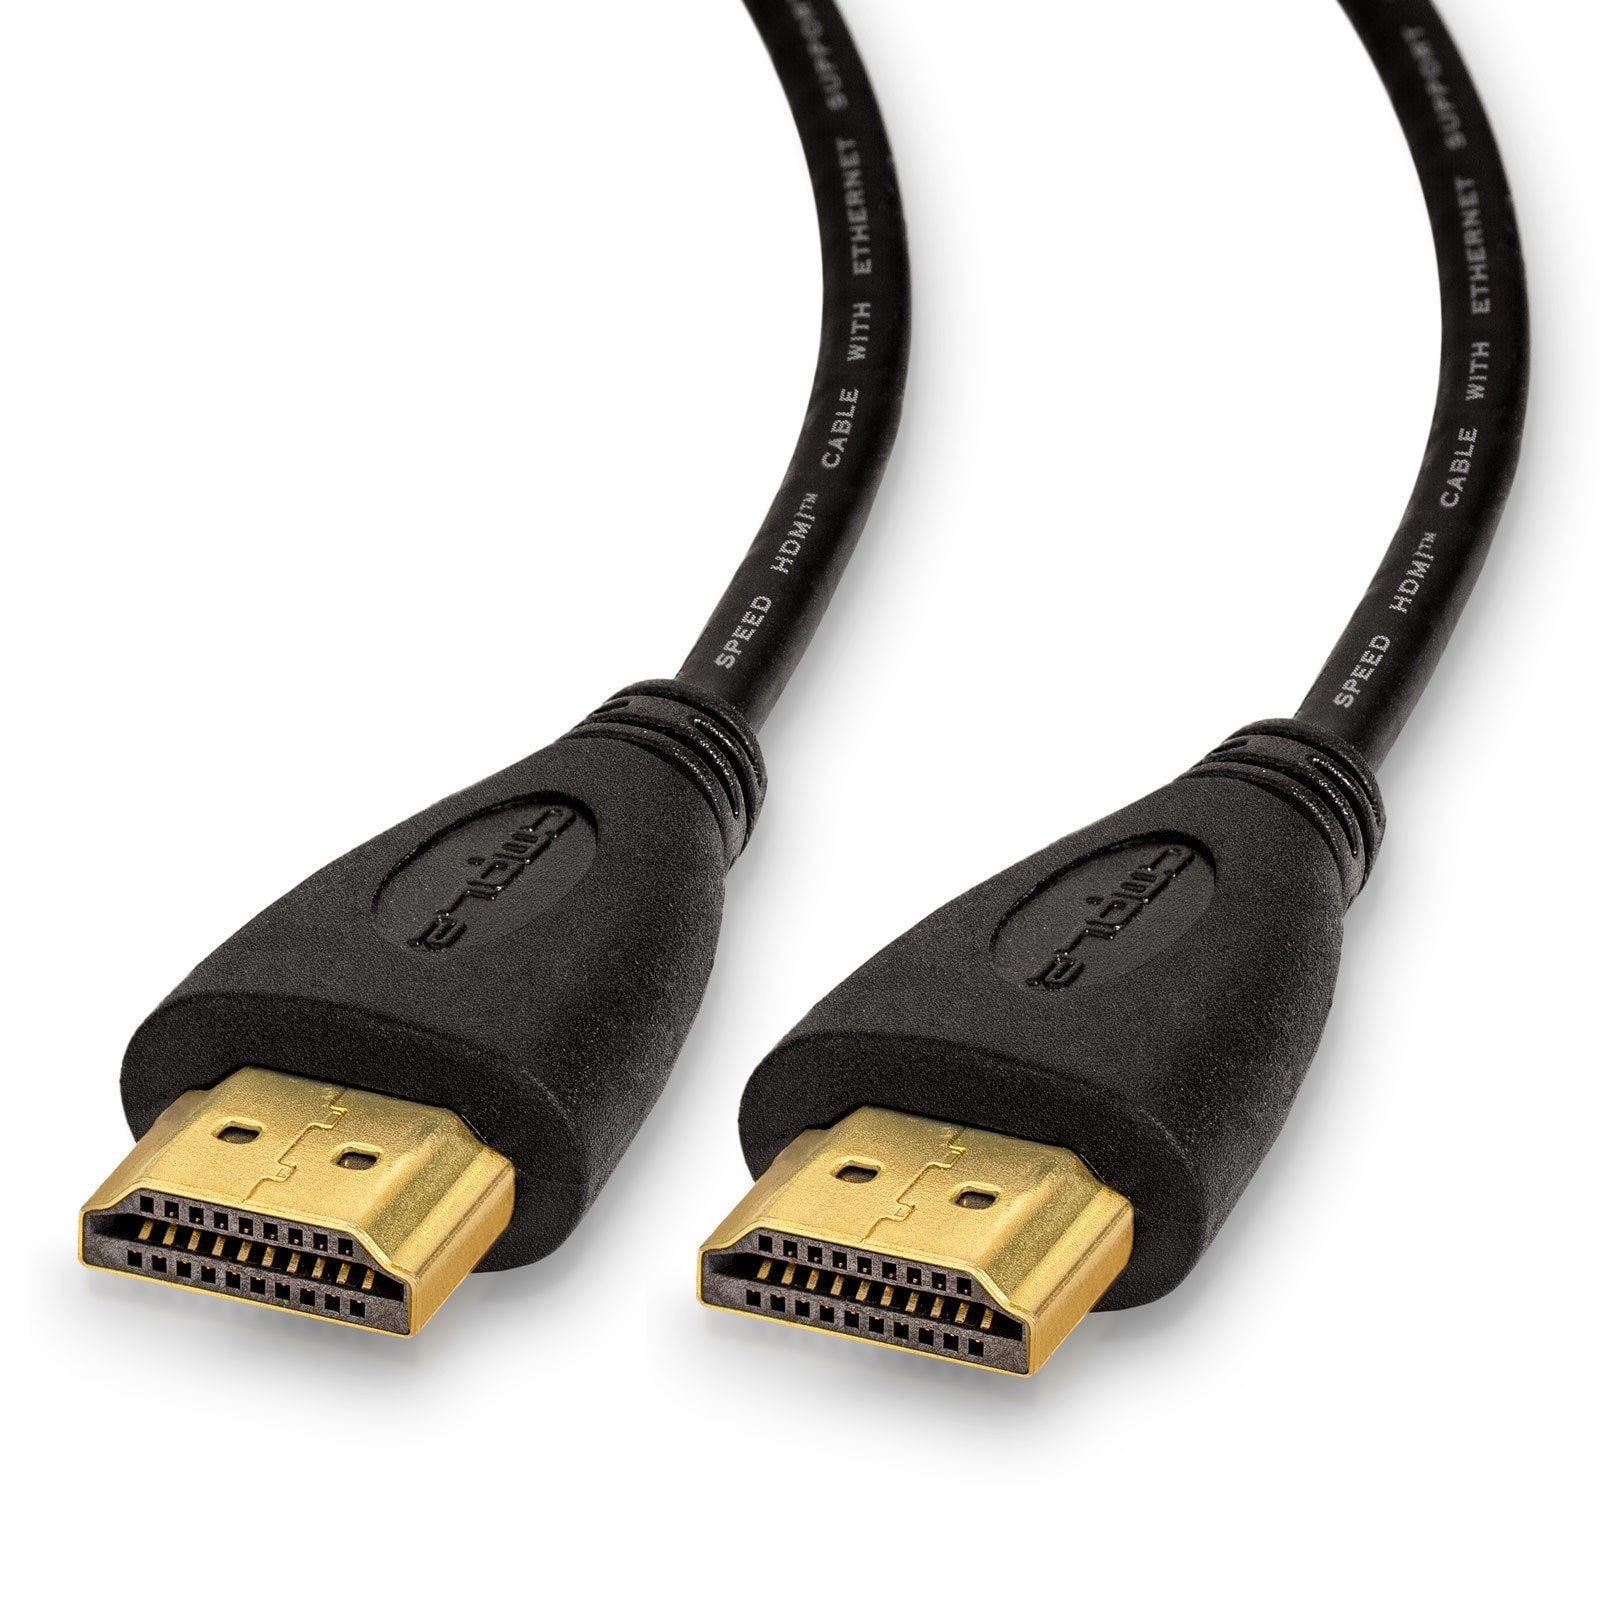 PREMIUM HDMI Flat Cable V1.4 HIGH SPEED 1080P GOLD FULL HD 3D TV LEAD 